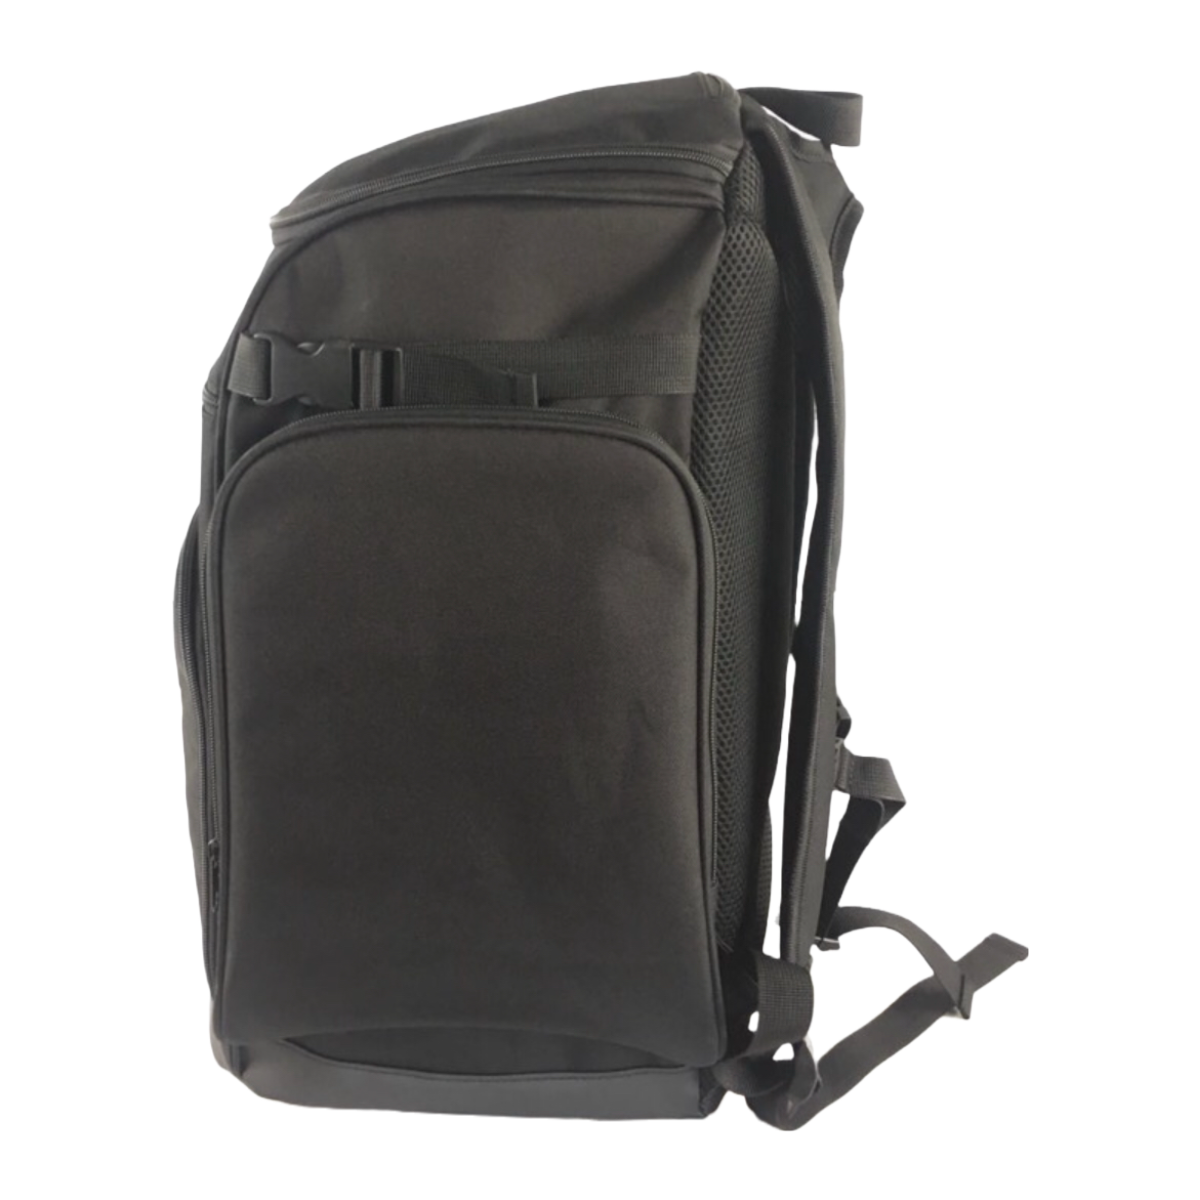 TC1 All-Purpose Backpack with Meal Compartment - Your Ultimate On-the-Go Solution"